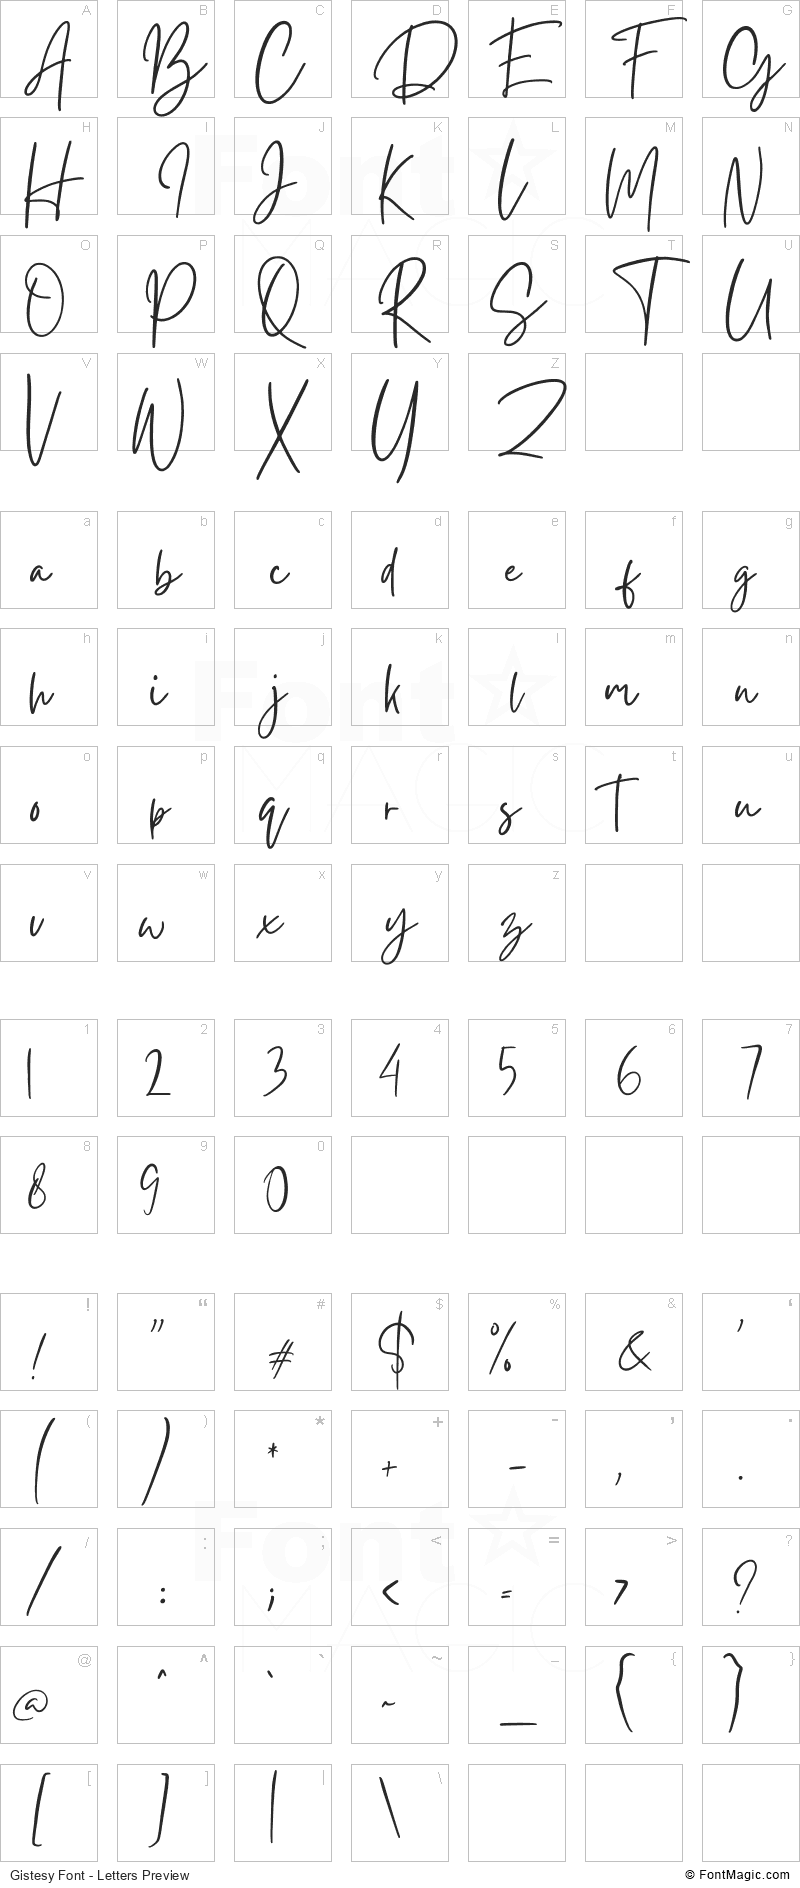 Gistesy Font - All Latters Preview Chart